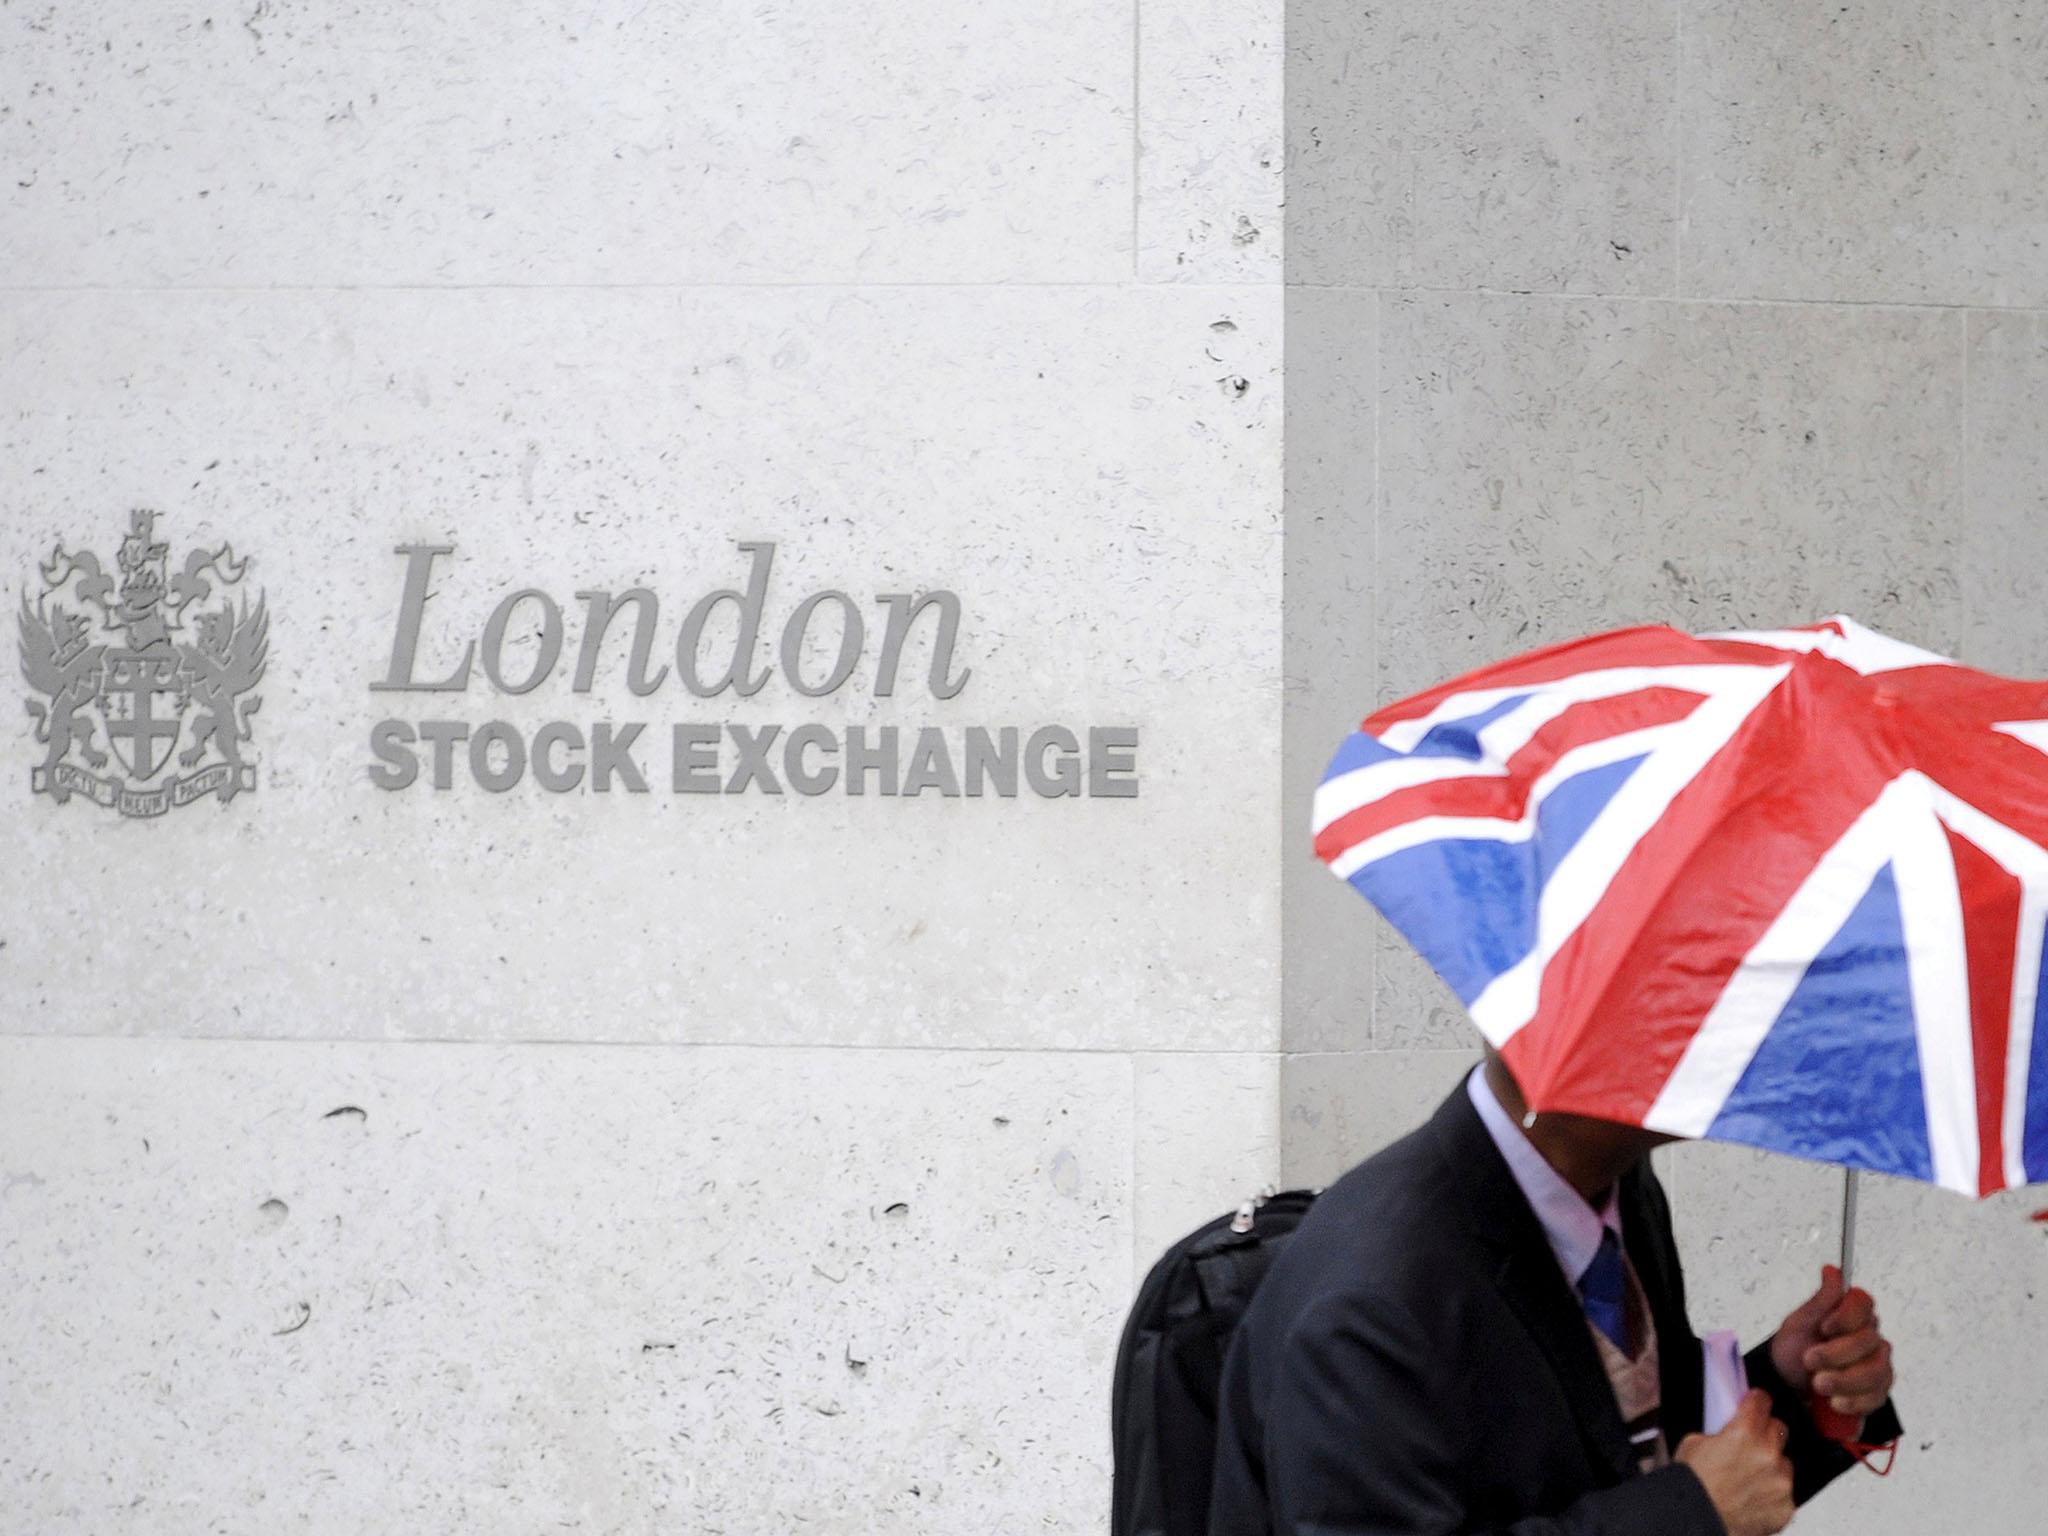 A Brexit storm is brewing for the London Stock Exchange